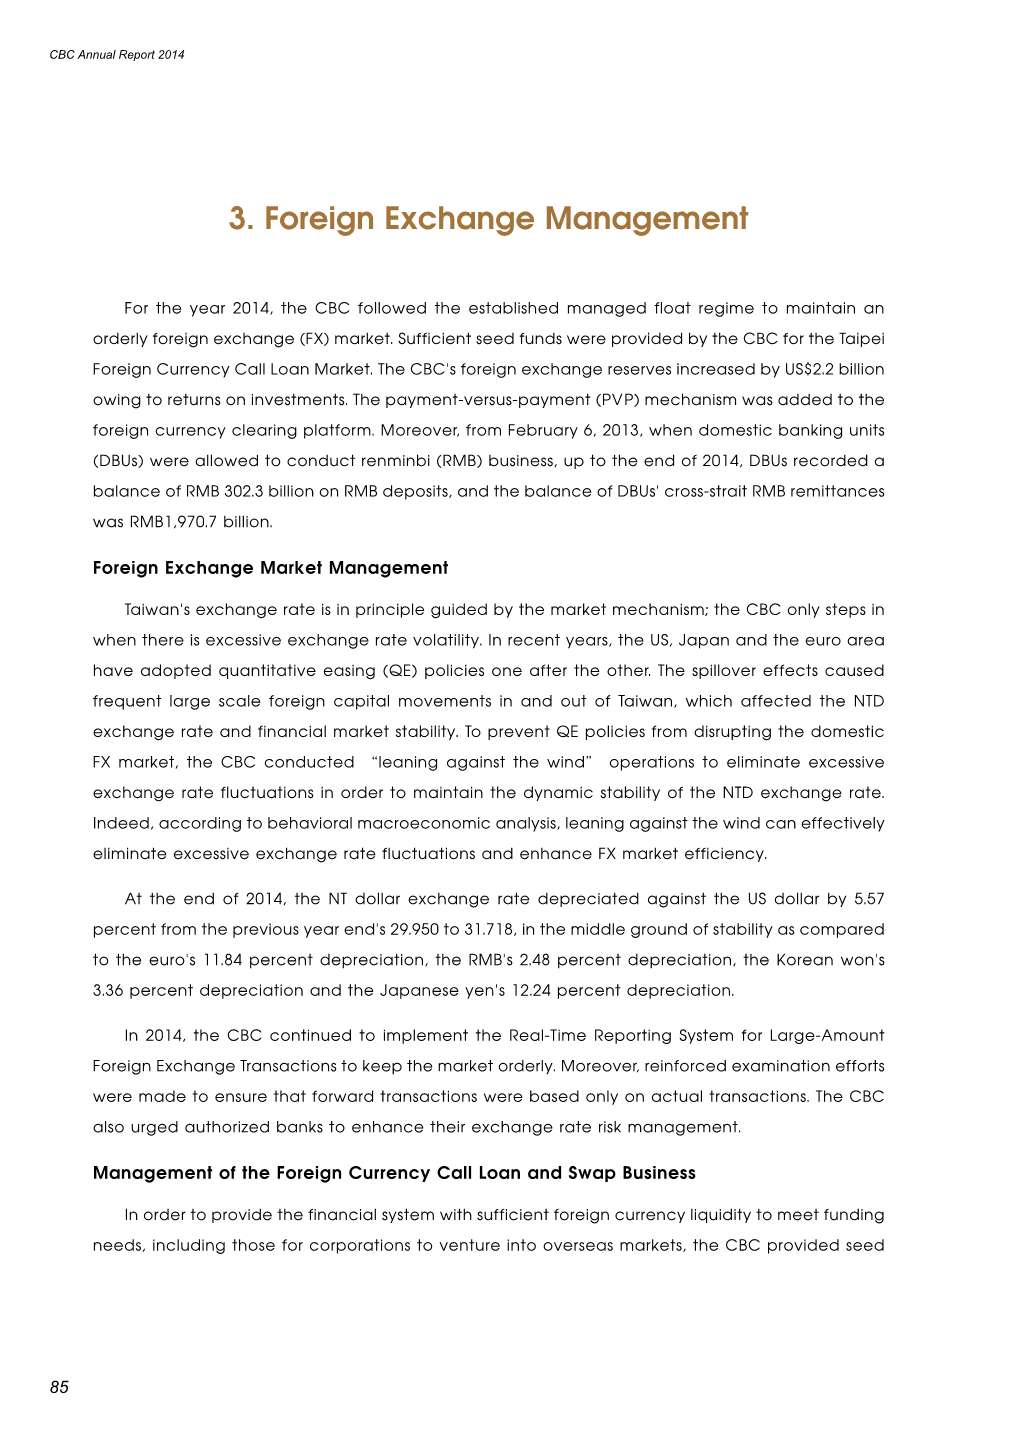 3. Foreign Exchange Management